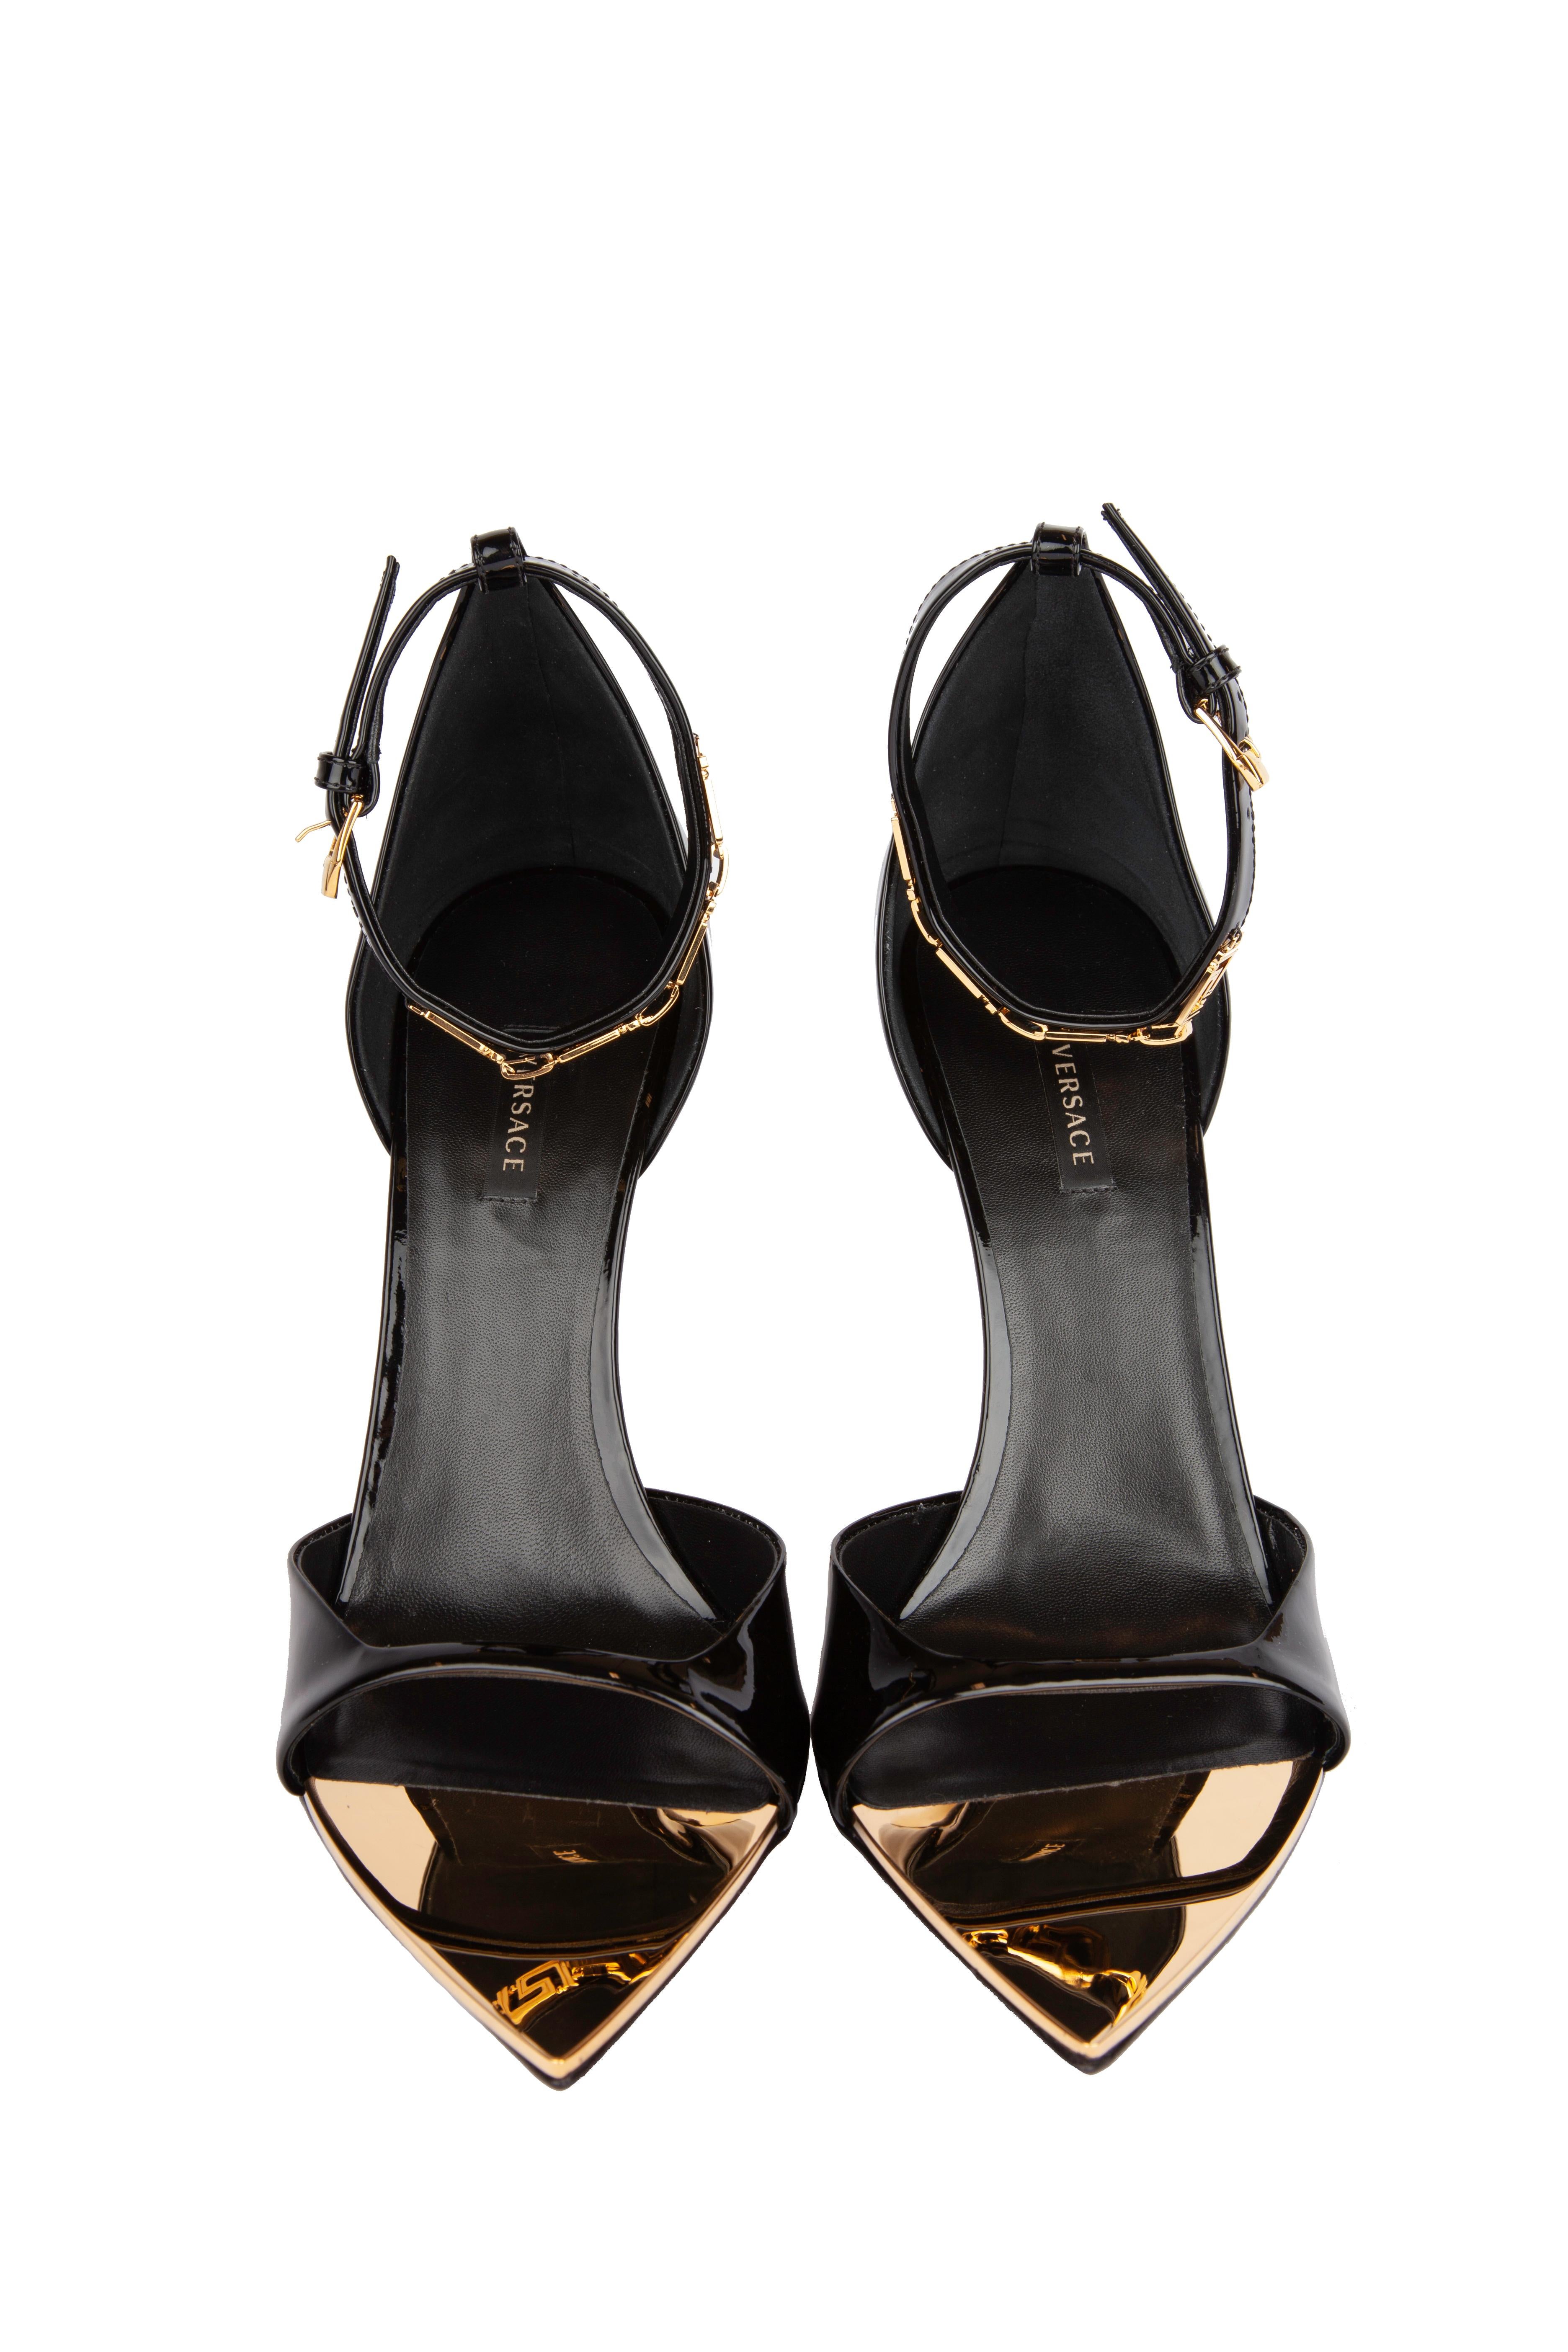 Versace Black Patent Leather Irina Strap Heels with Gold Tone Hardware Size 36 In New Condition In Paradise Island, BS